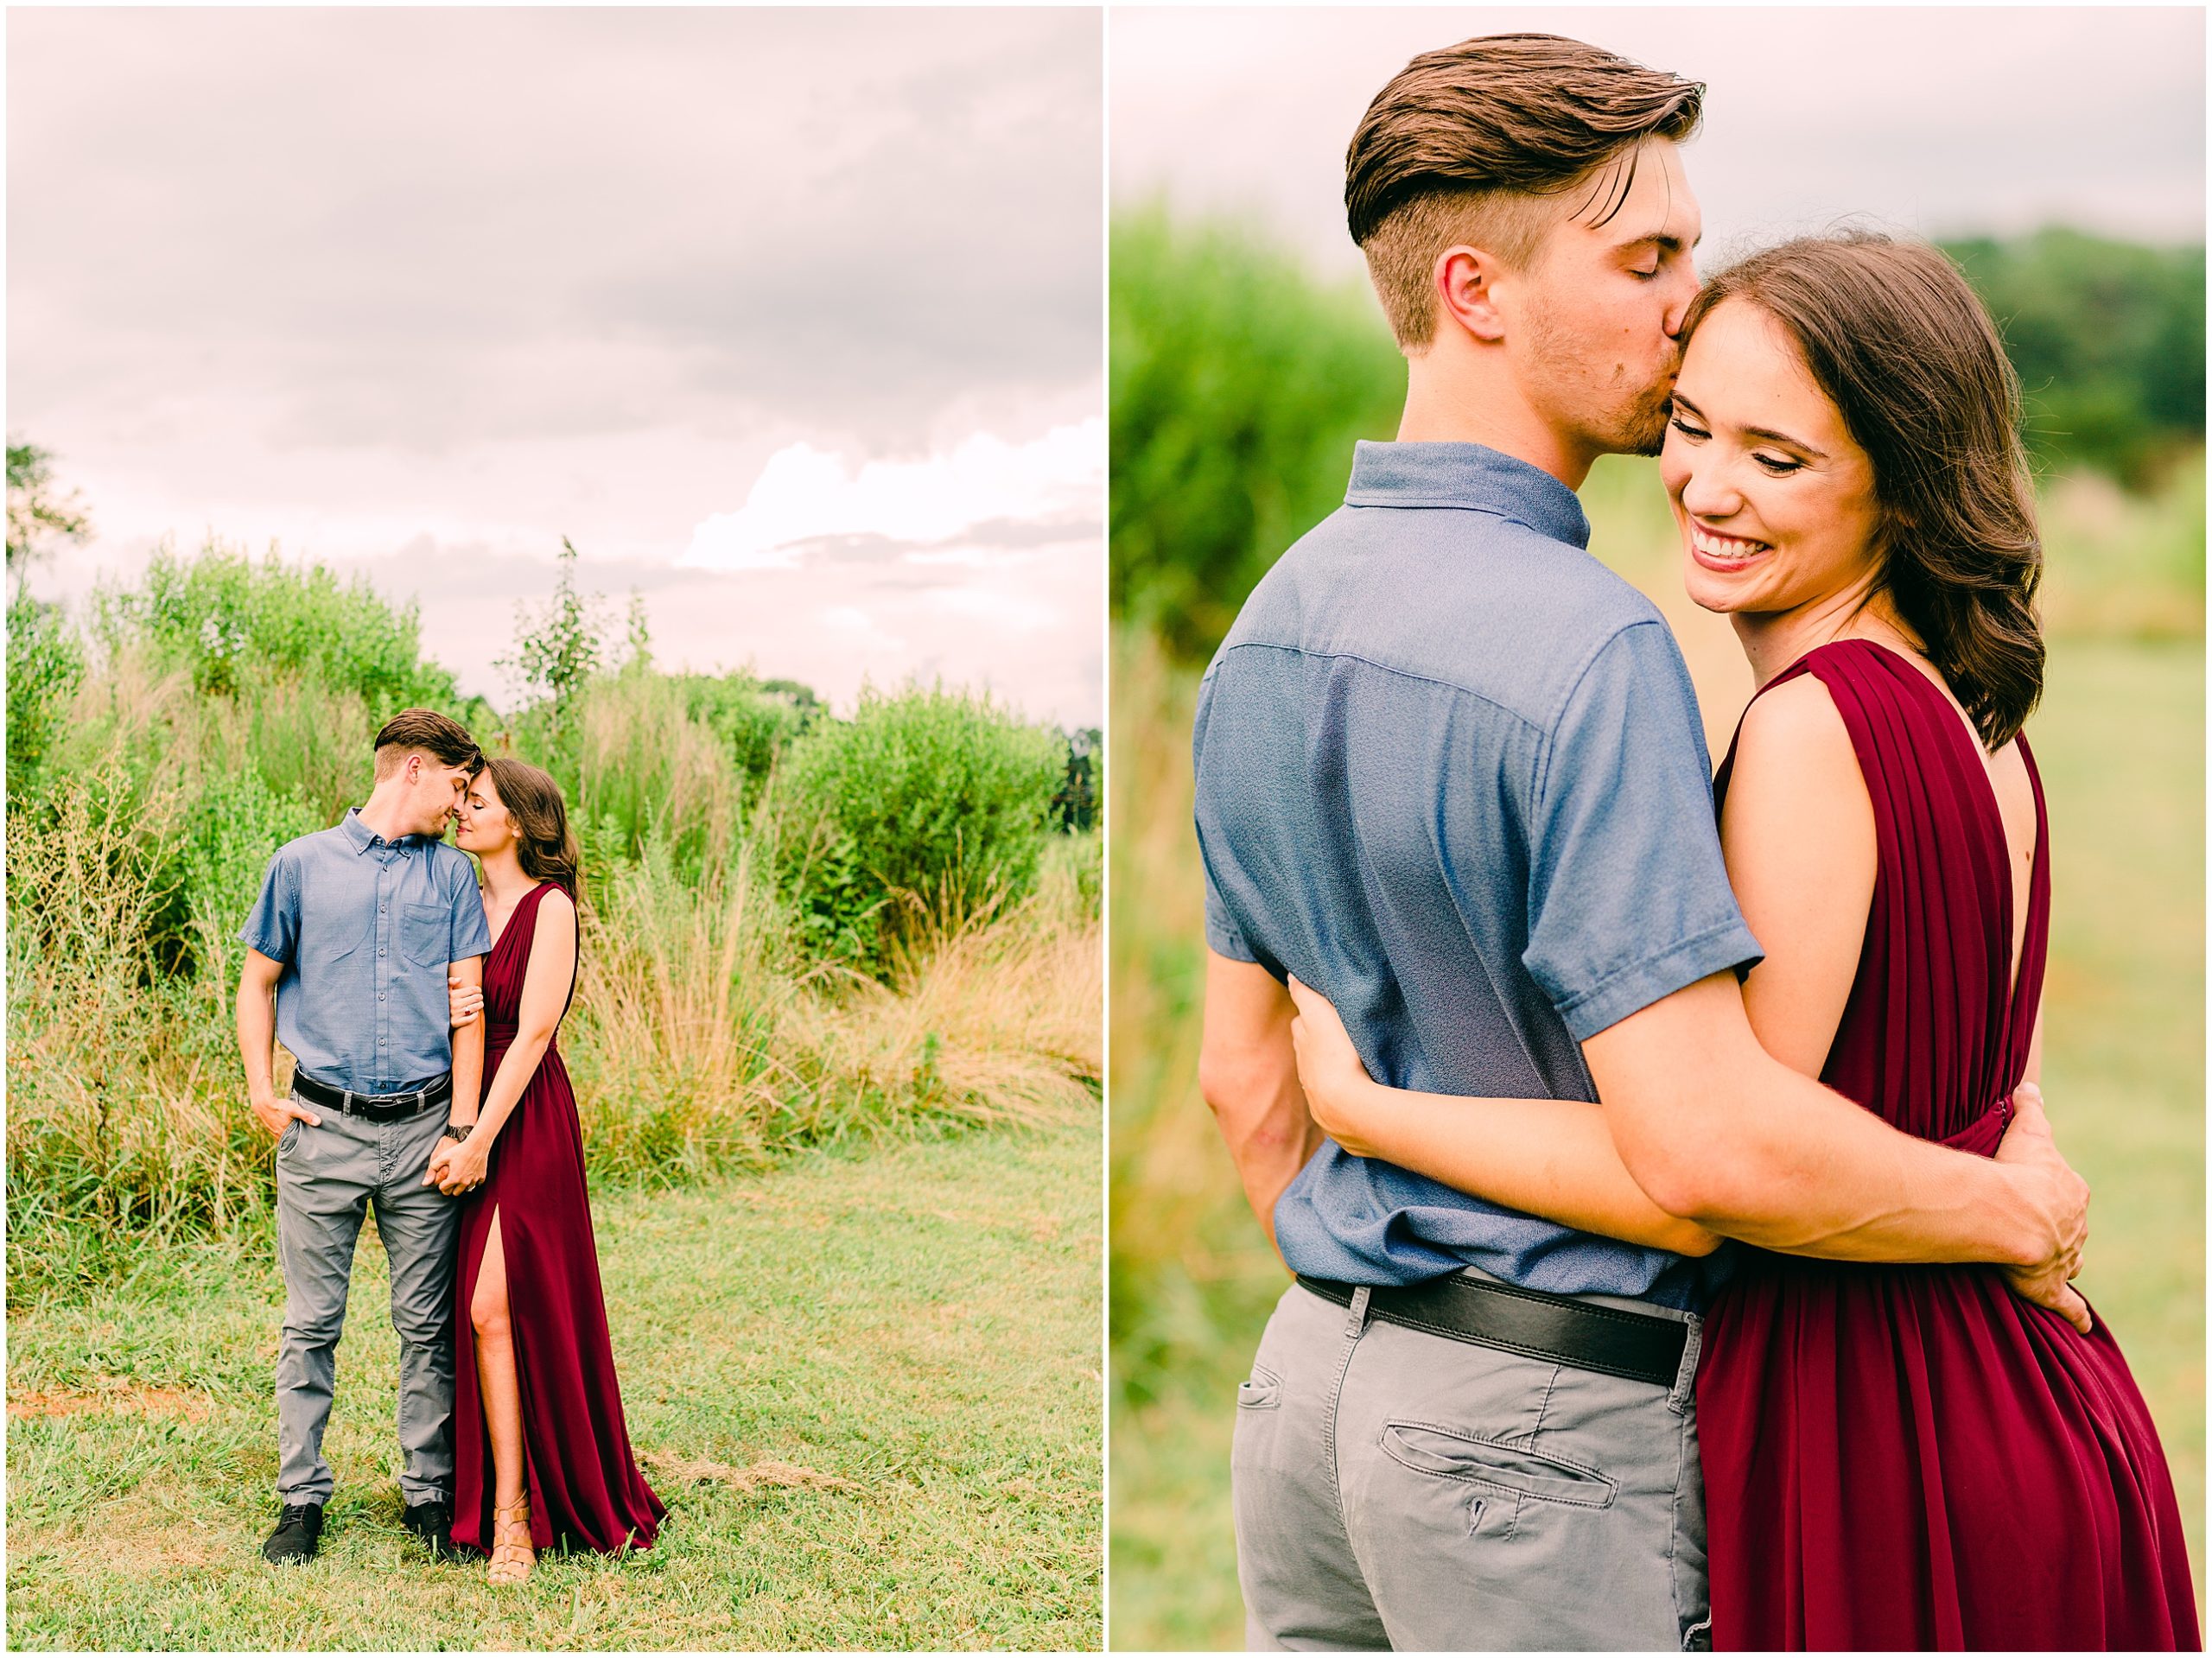 Engagement session at clarks creek in charlotte